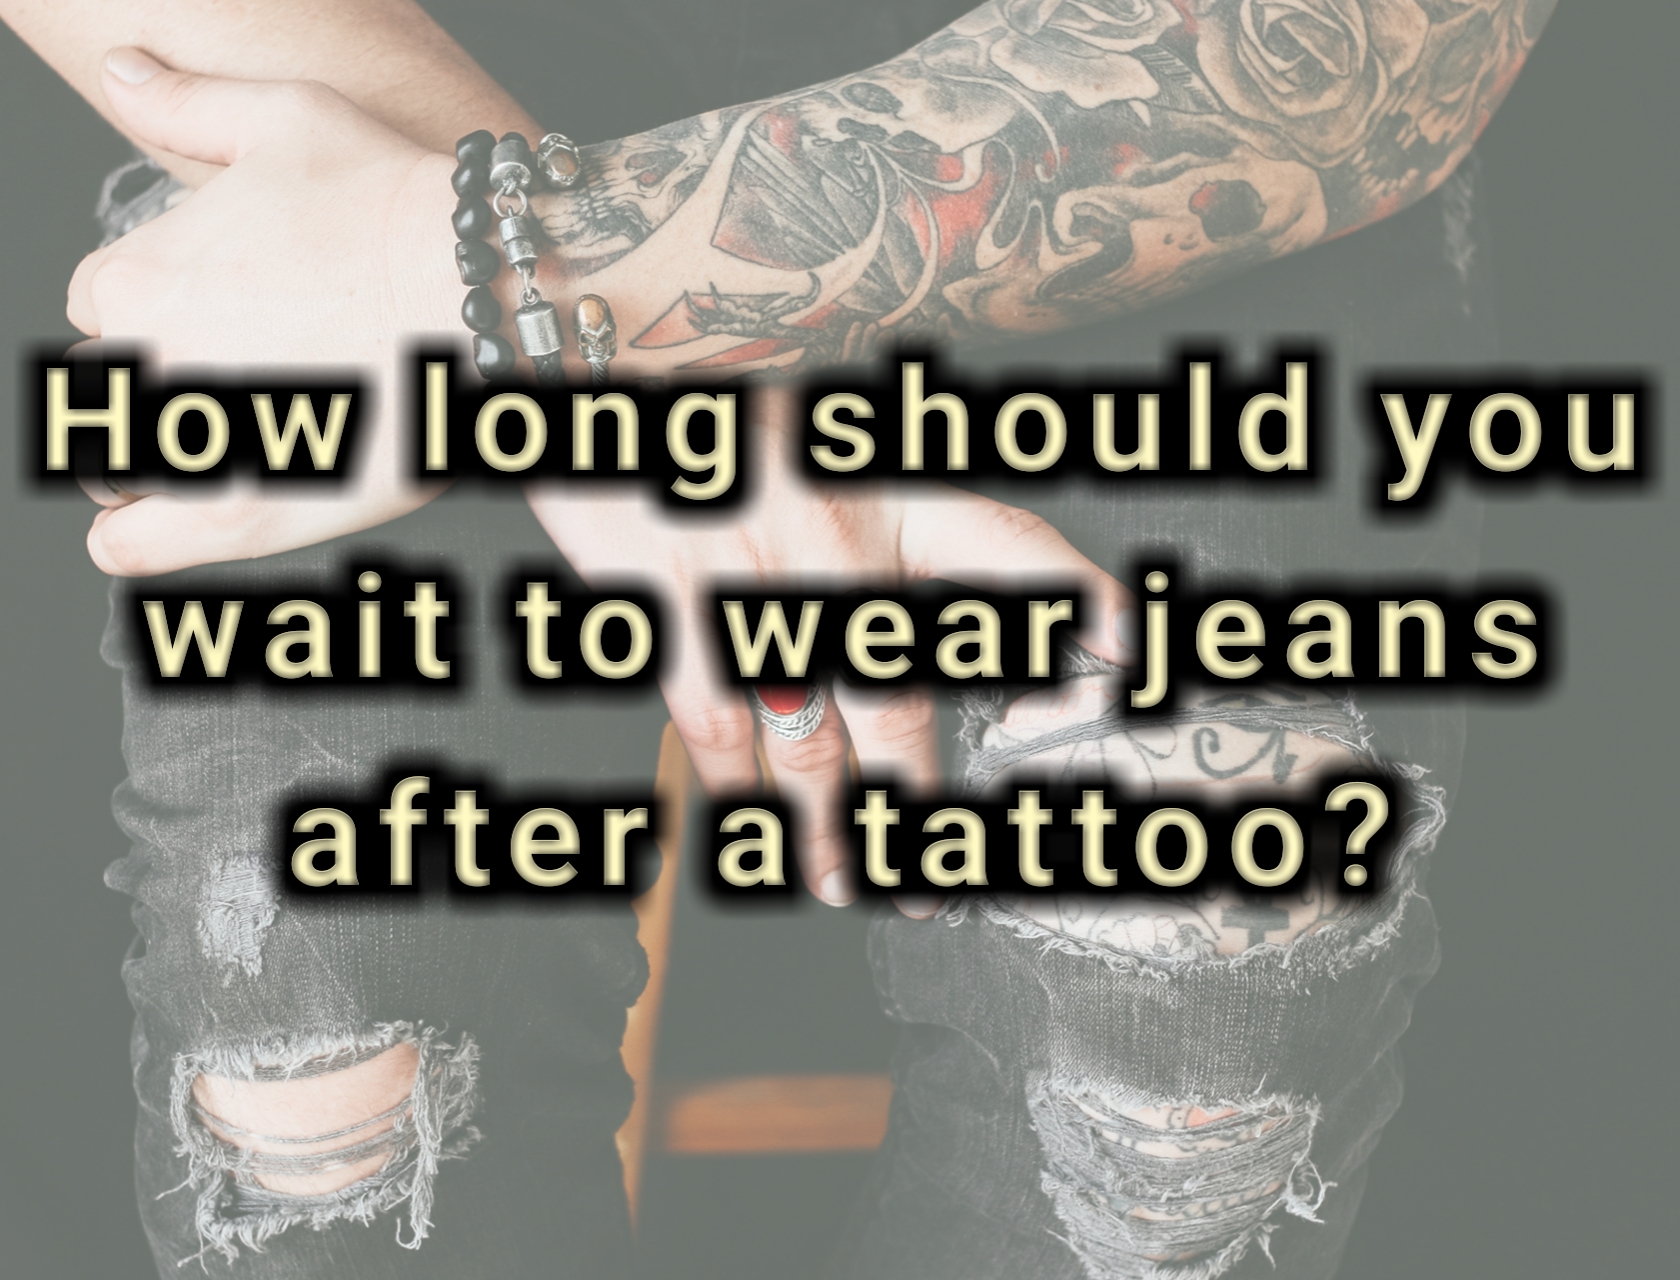 Can i wear jeans a week after tattoo